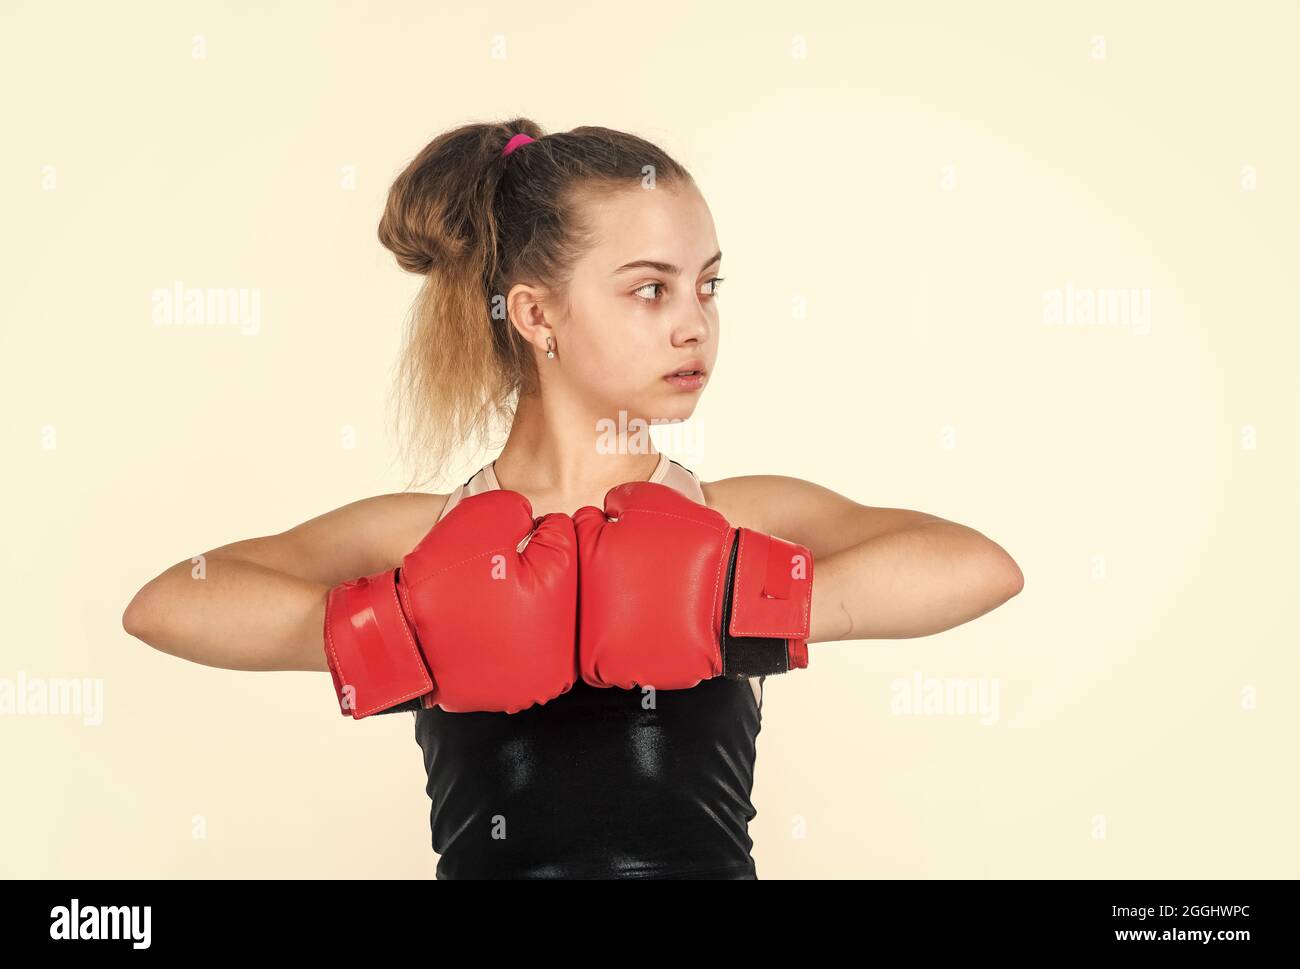 Boxer use various punch combinations, including the jab, hook, uppercut,  cross, swing, straight. Getting in close to make opponent on ropes and  knocko Stock Photo - Alamy